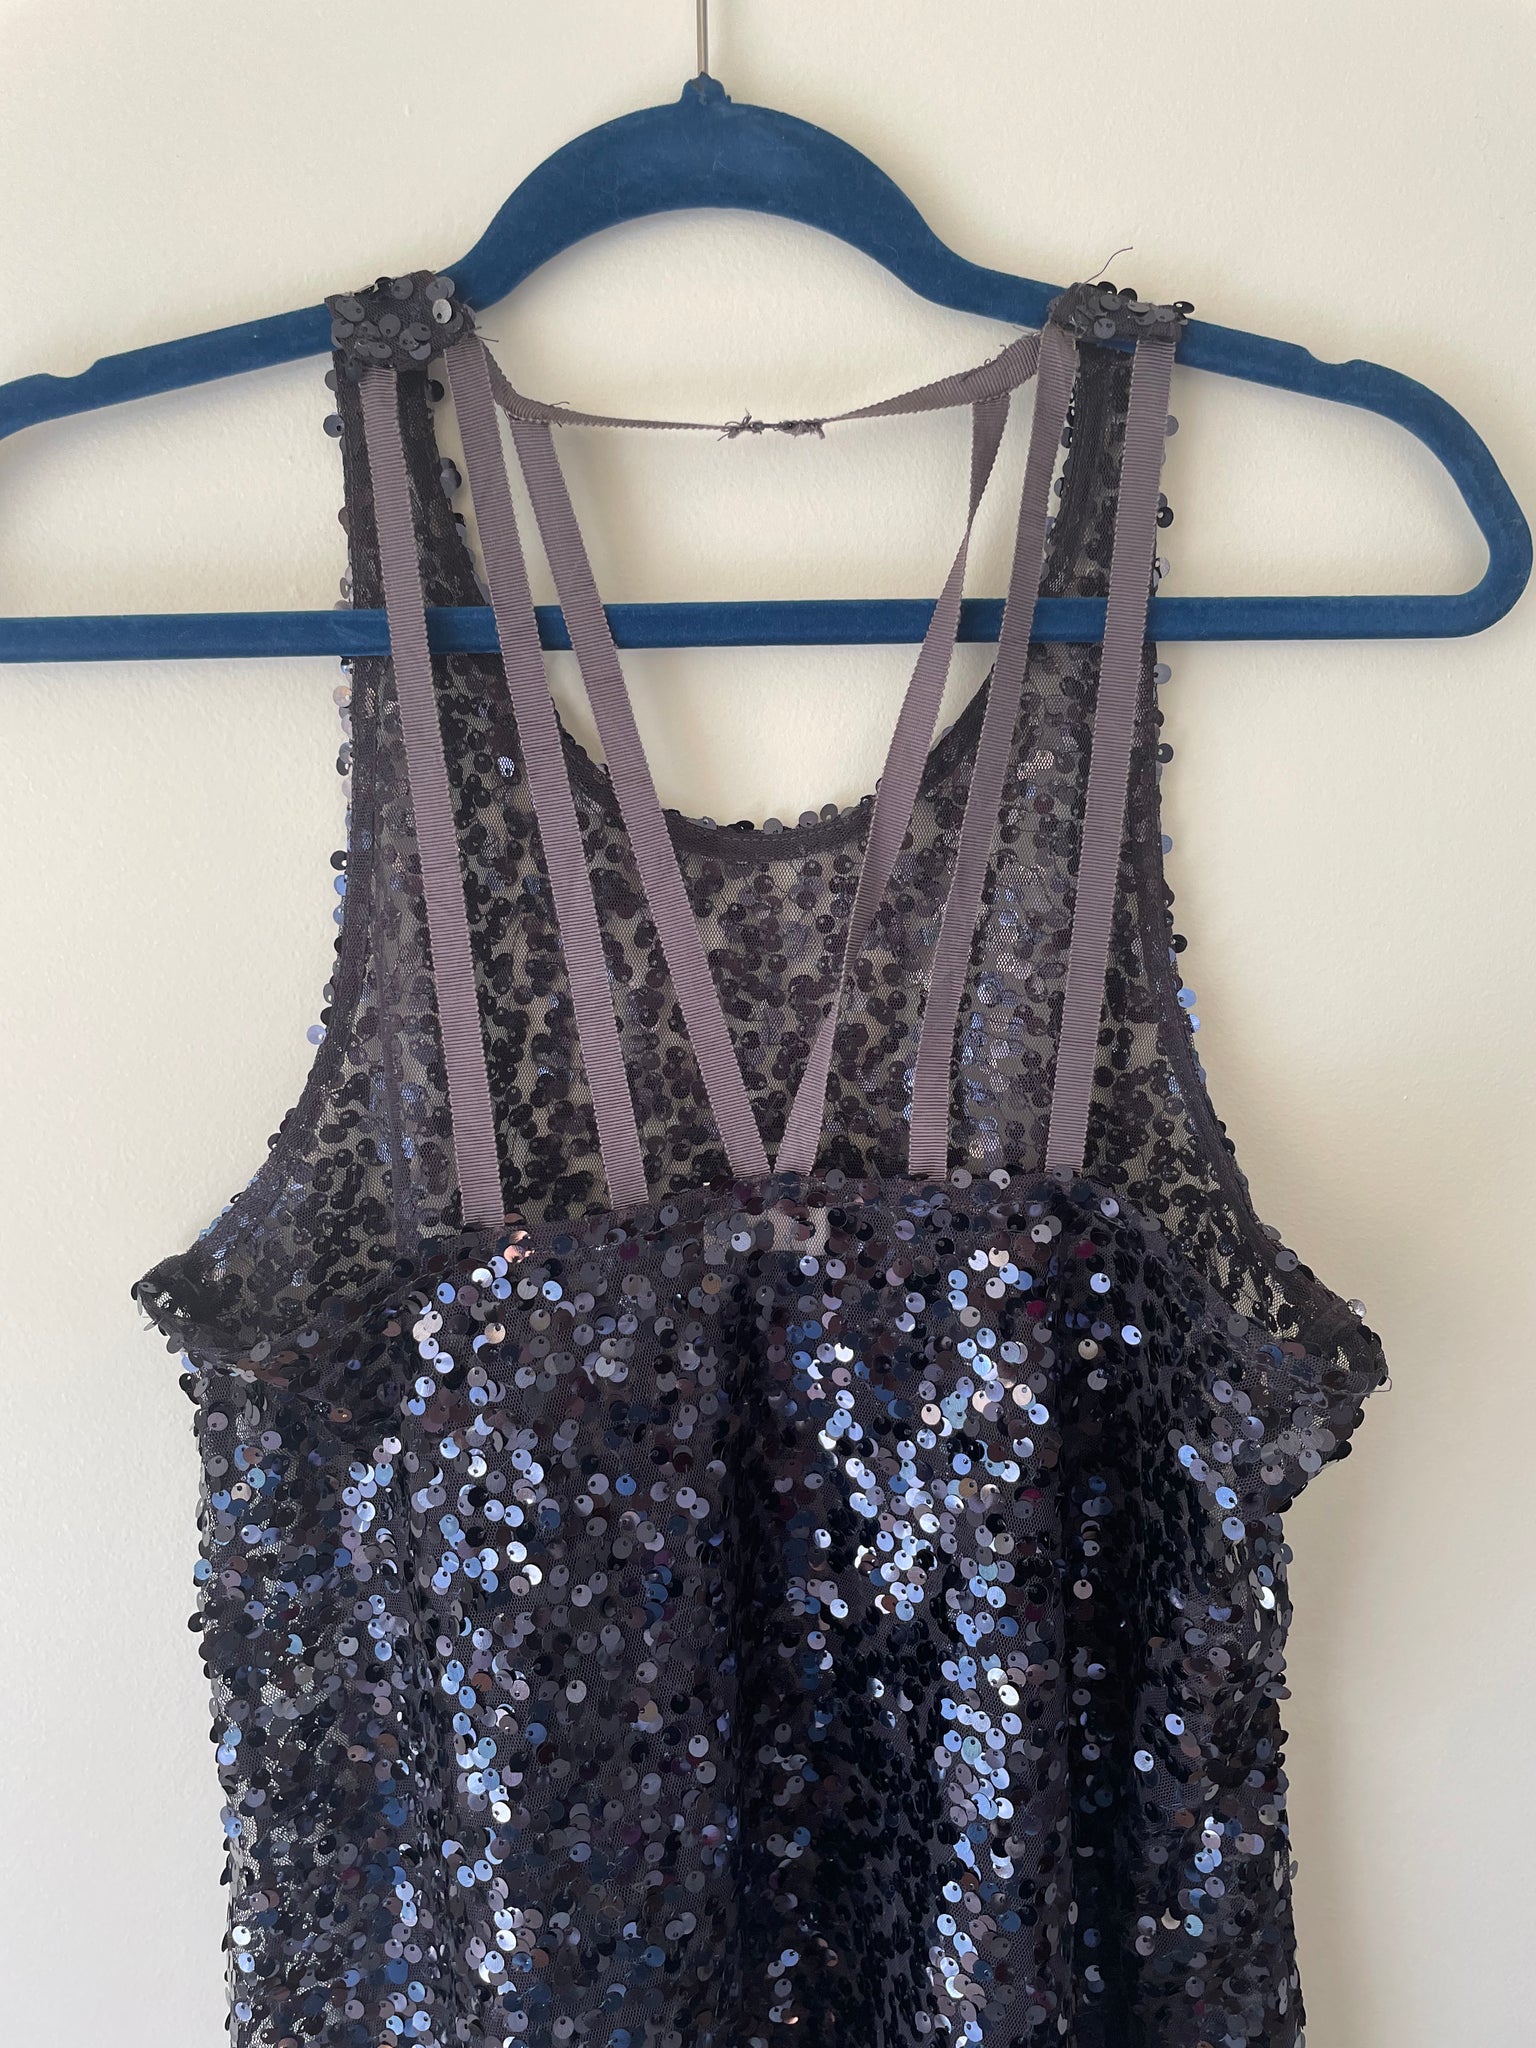 Free People sequin tank top, Size S